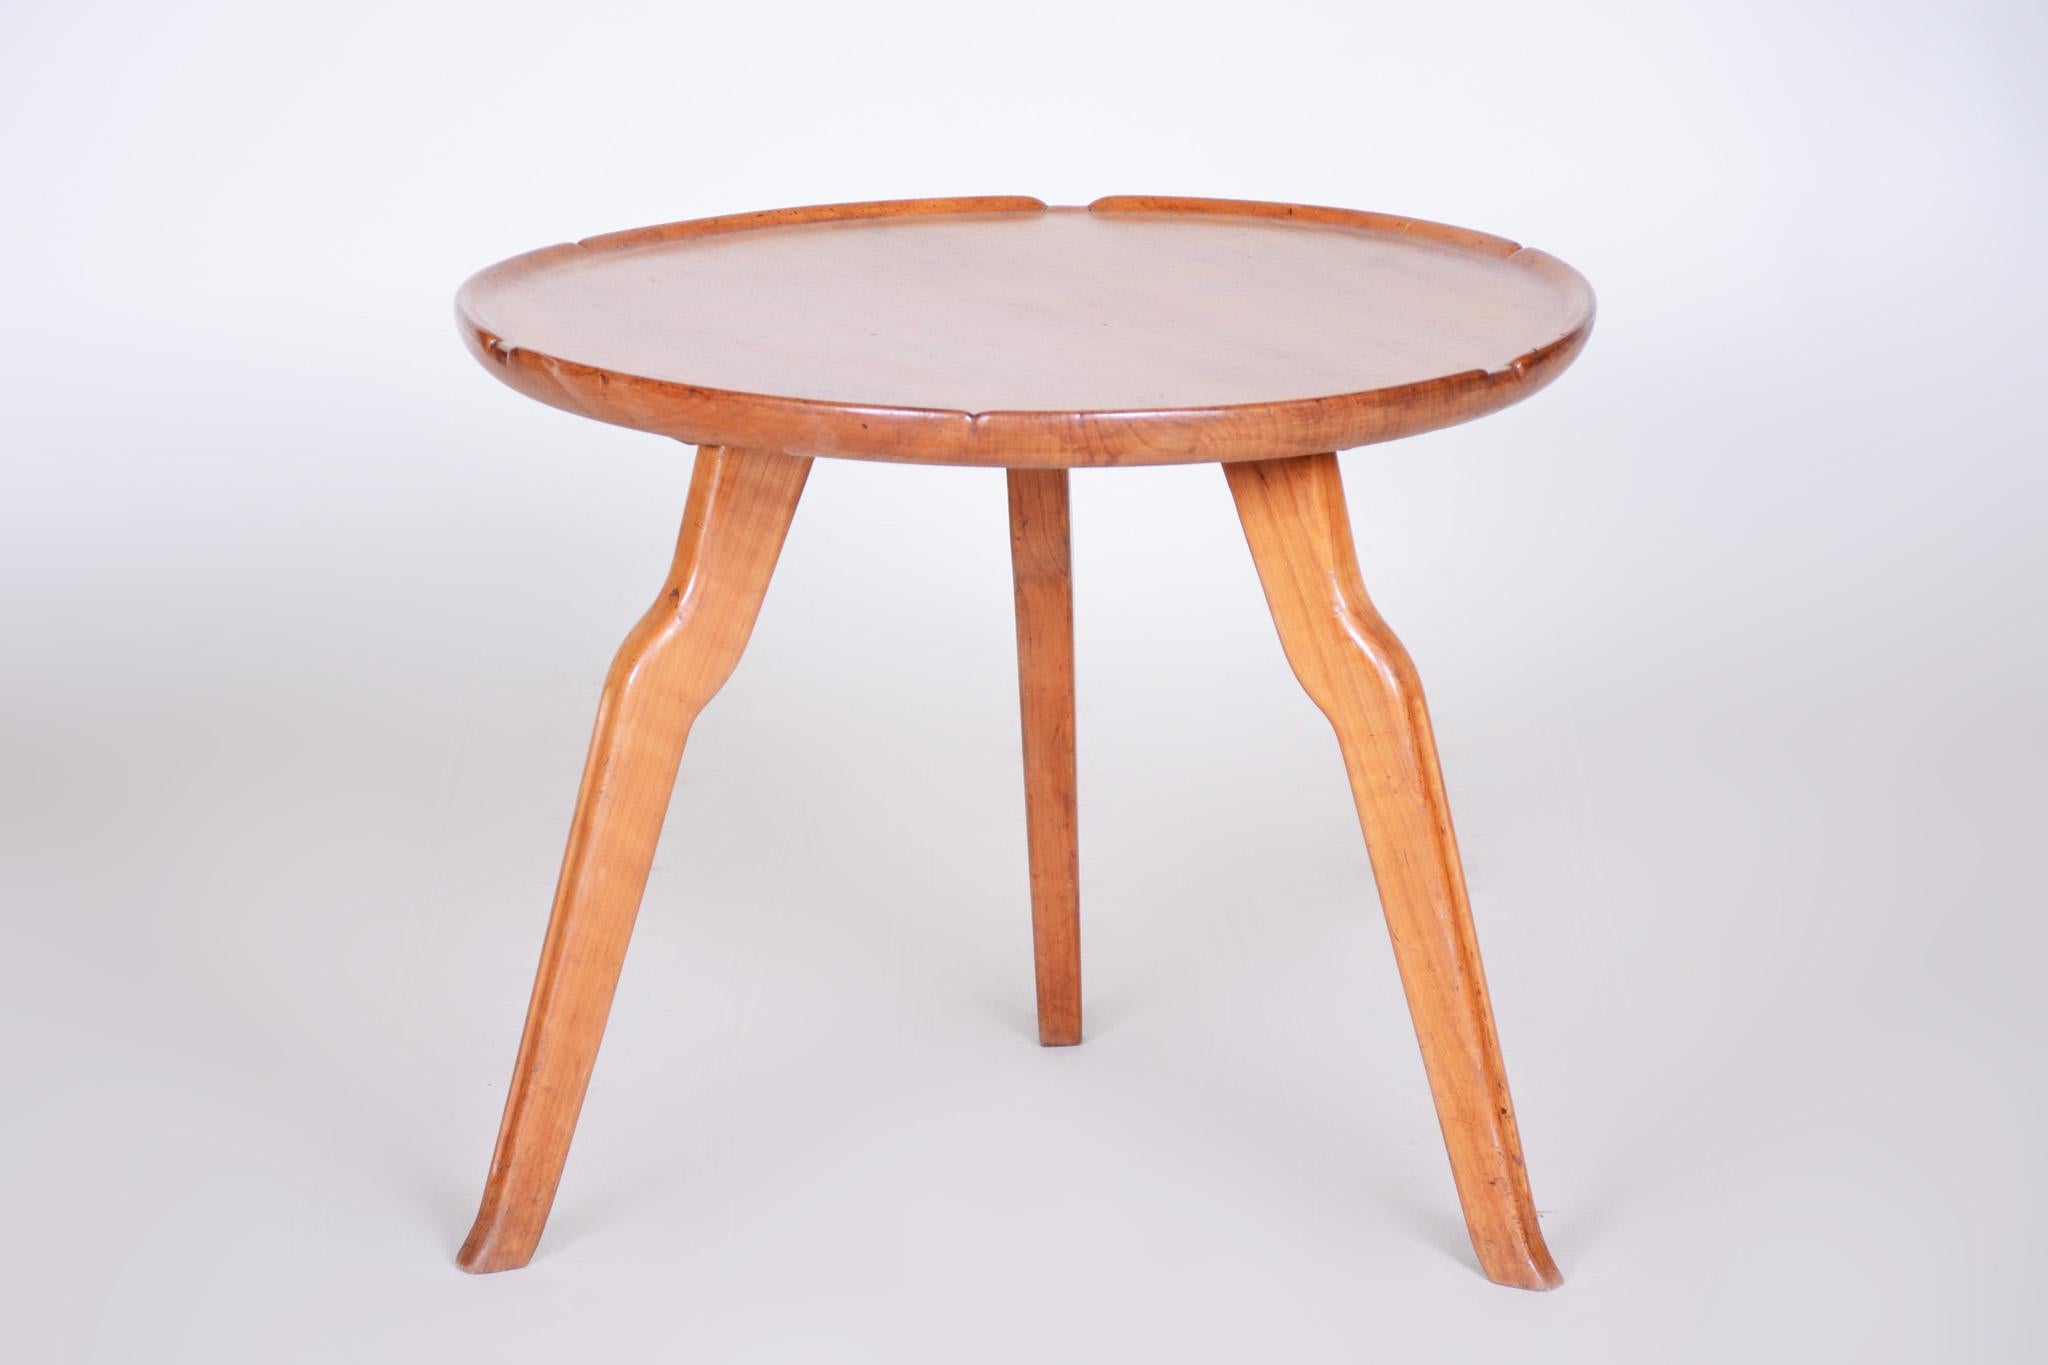 Small Brown Round Table, Czech Midcentury, Made Out of Cherry Tree, 1940s For Sale 4